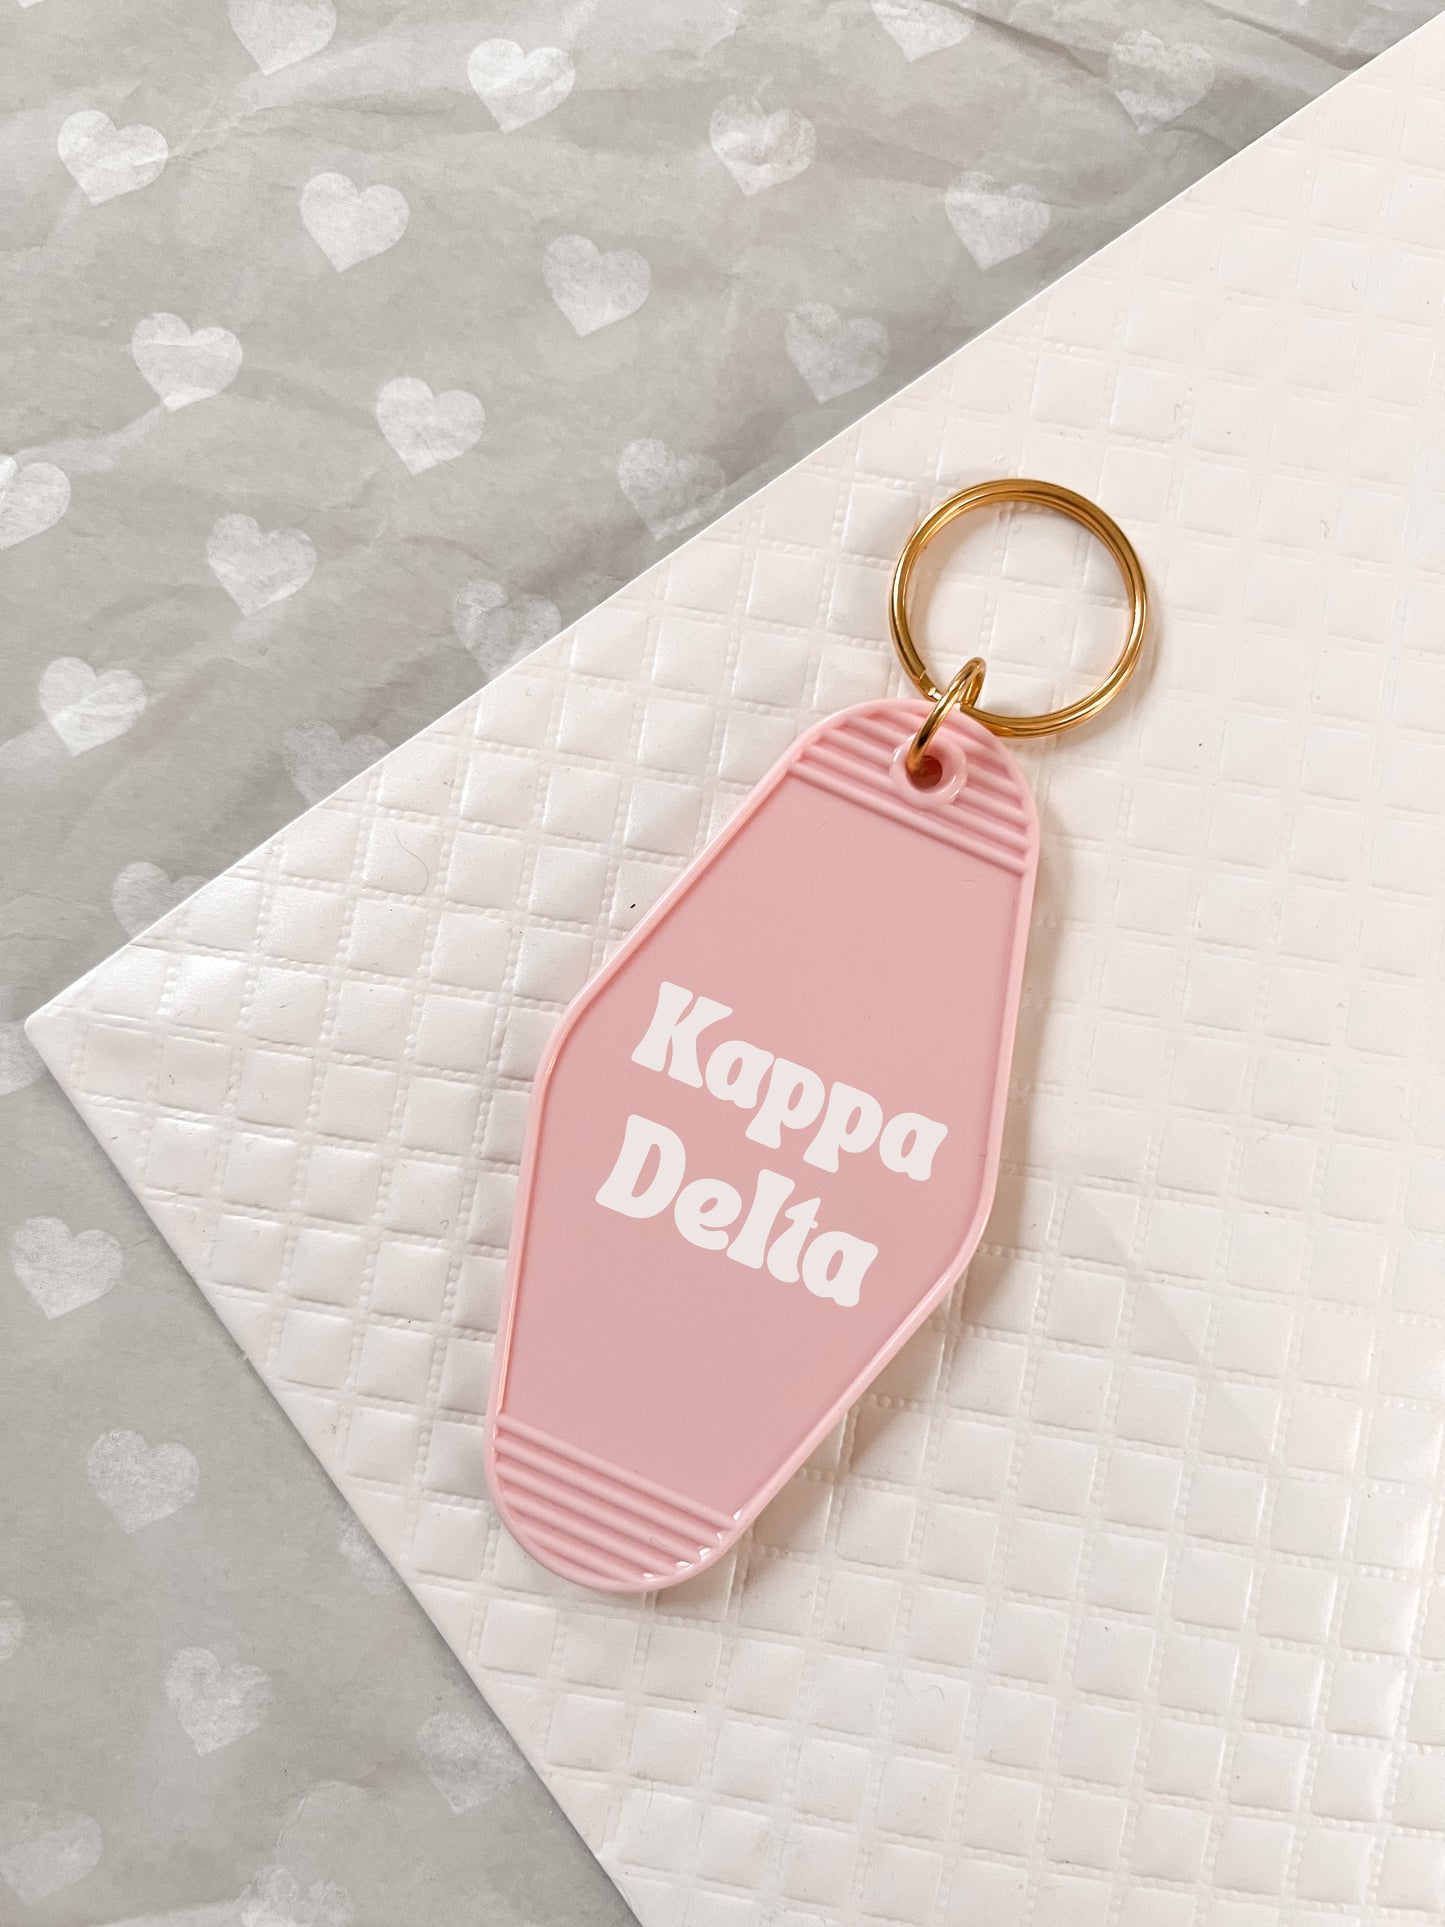 Kappa Delta Motel Hotel Key Chain in Soft pink with white letters and gold ring. KD